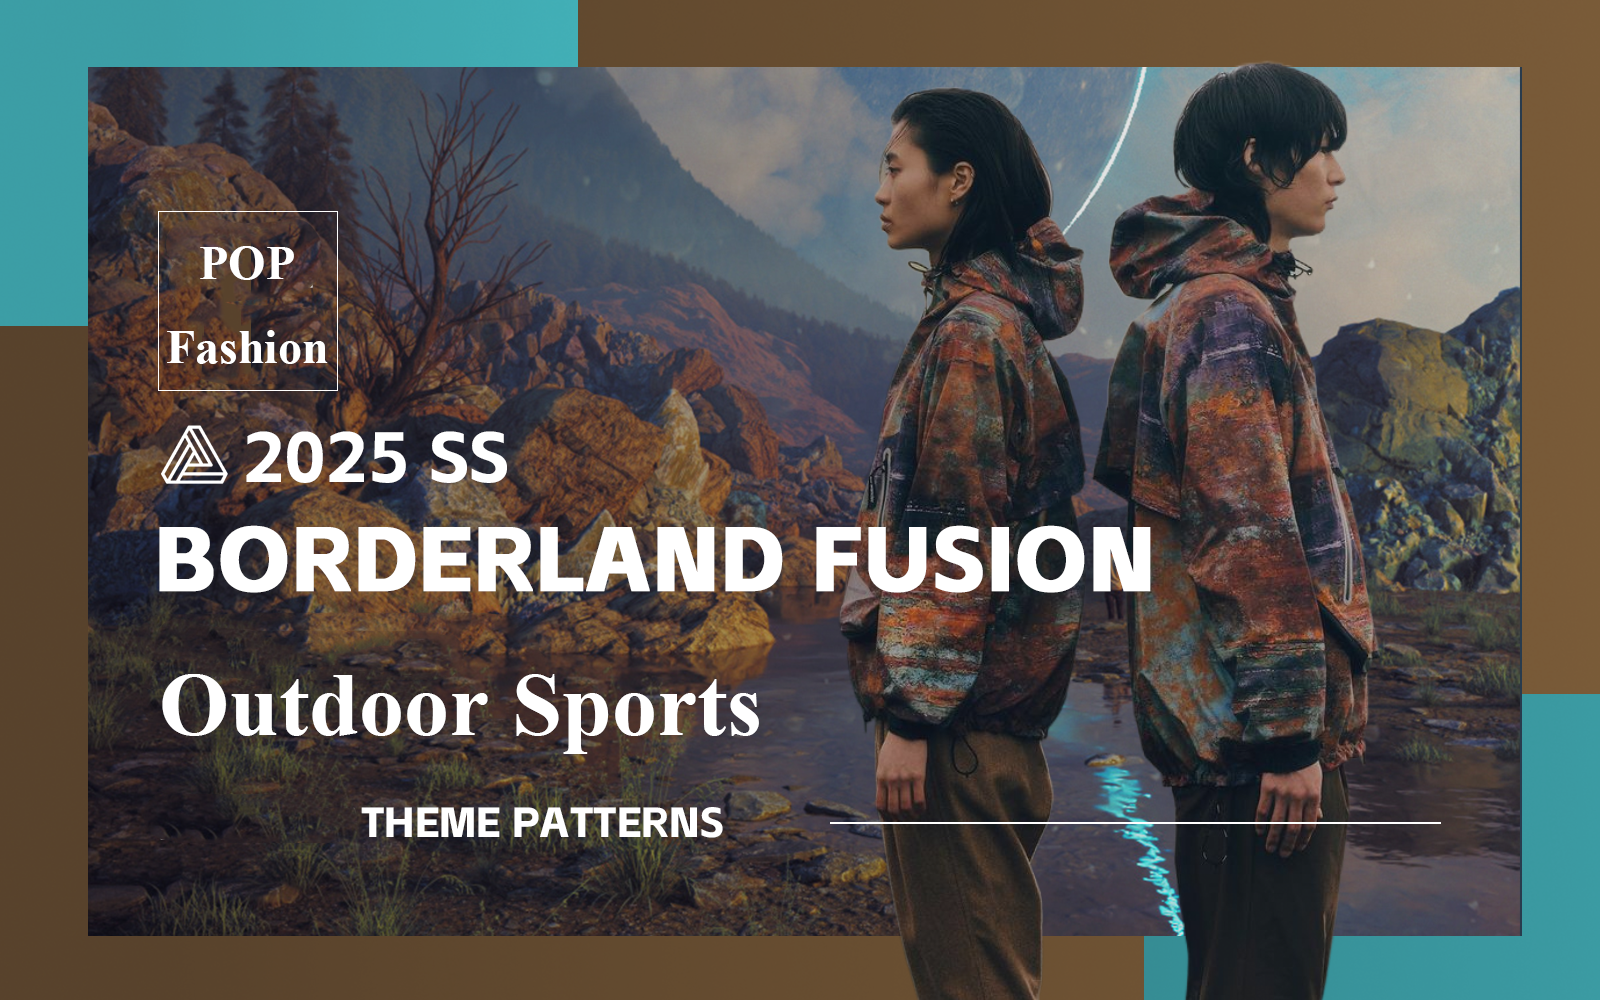 Borderland Fusion - 2025 Spring/Summer Pattern Trend for Outdoor Sports